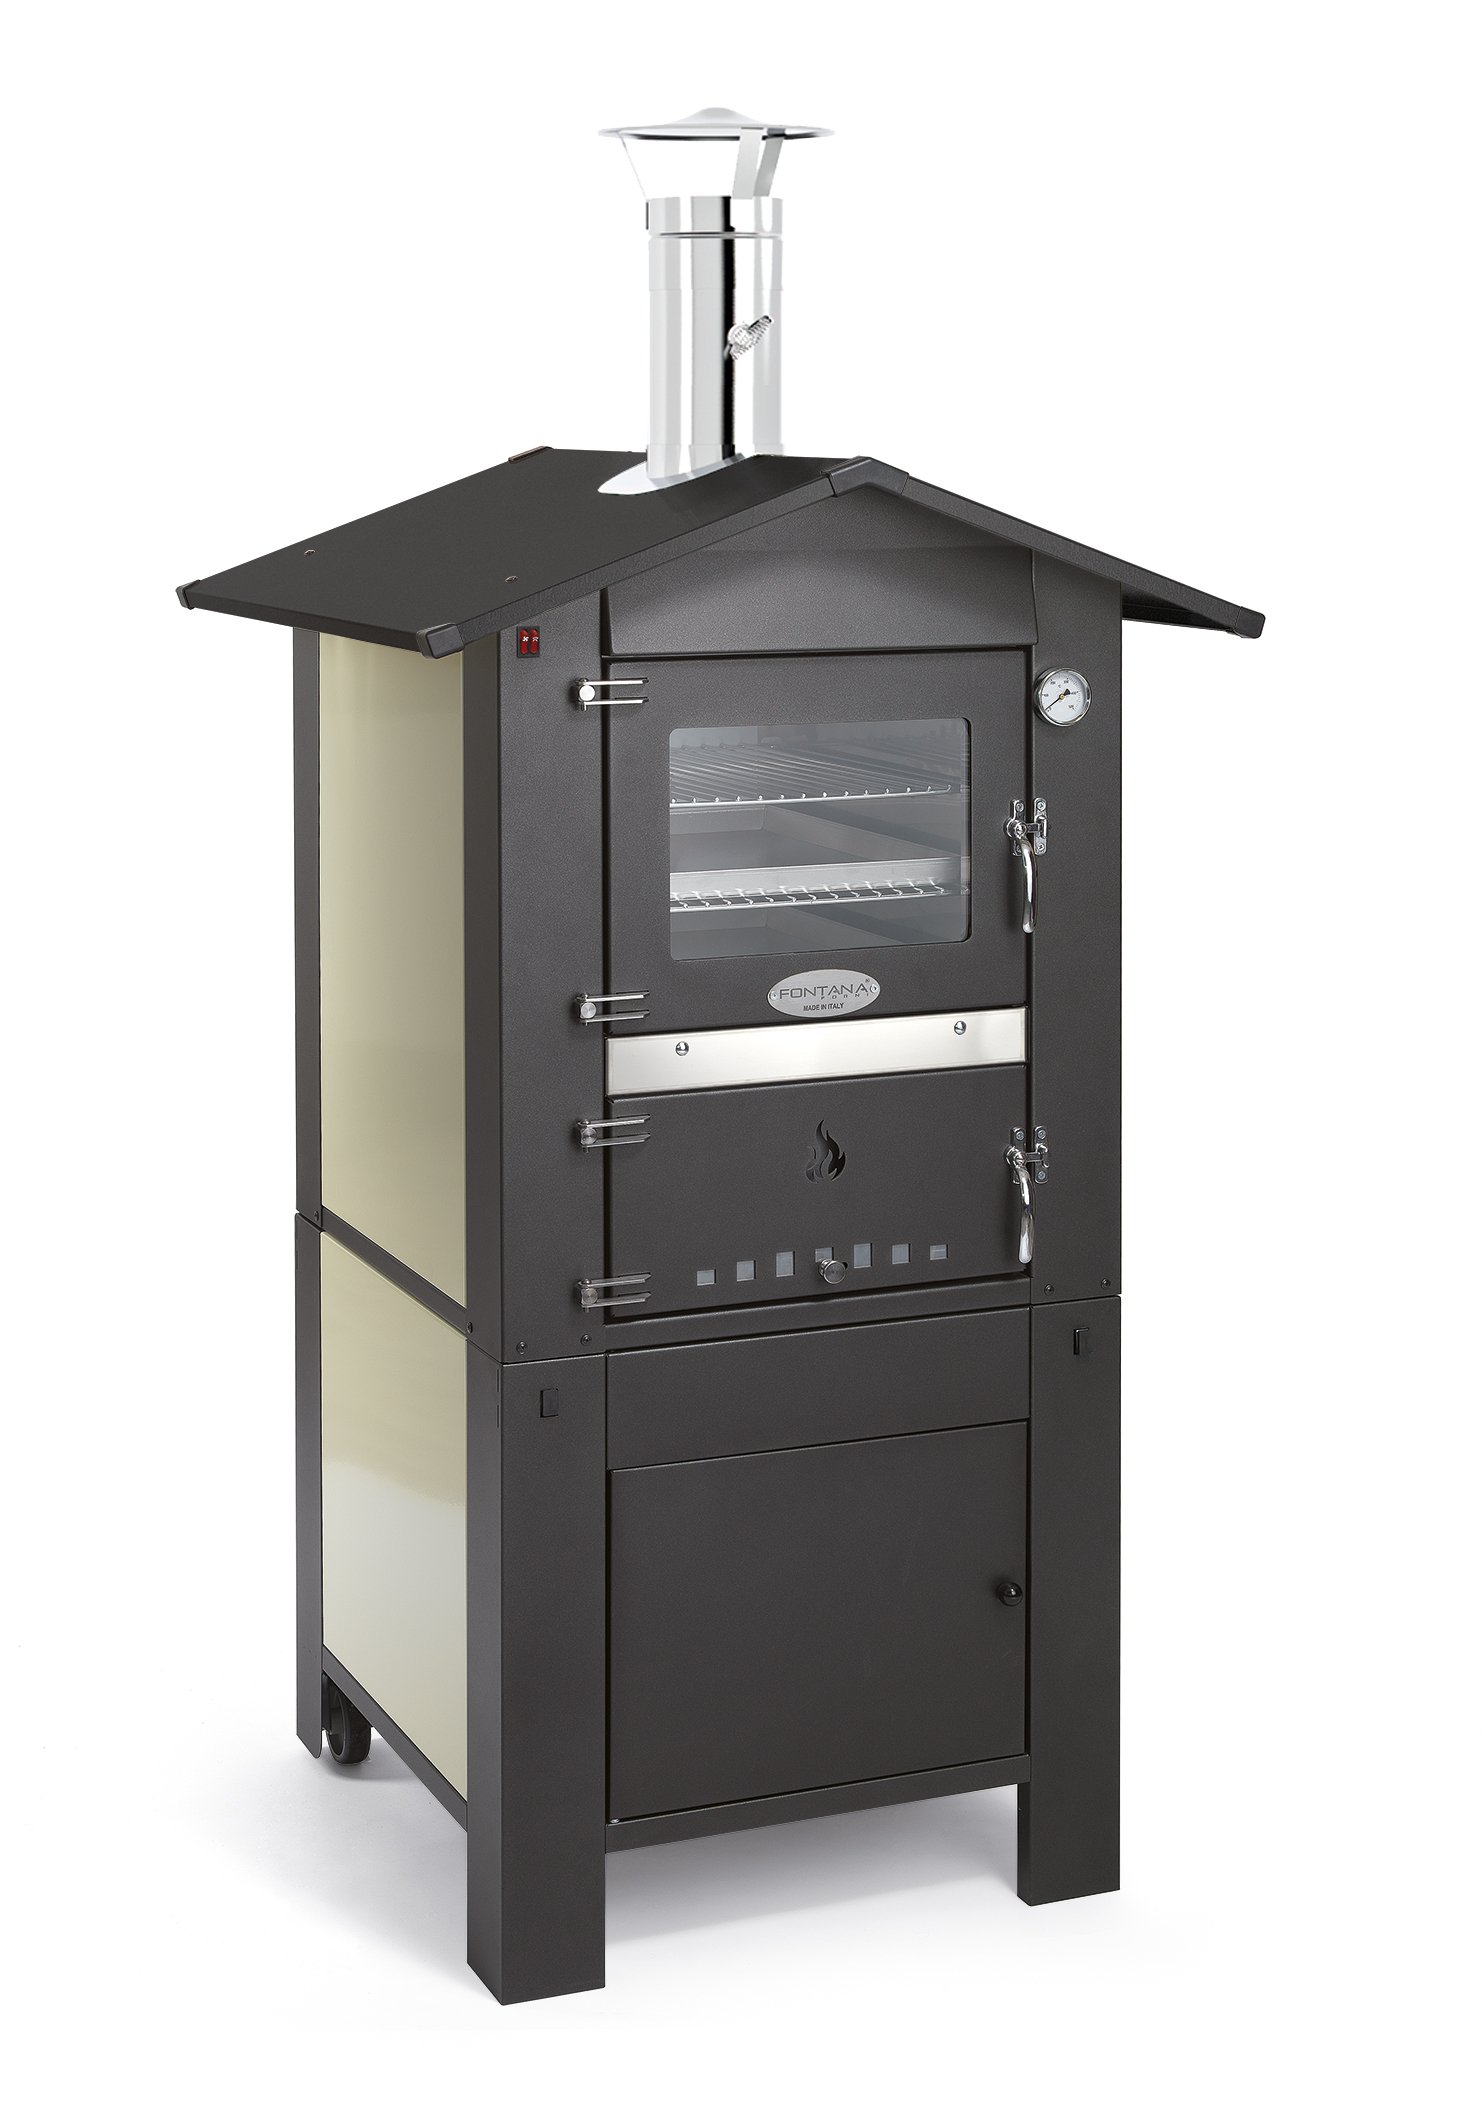 Bake house, pizza oven, bread oven Fontana Forno Italia, indirect firing for outdoor kitchen.